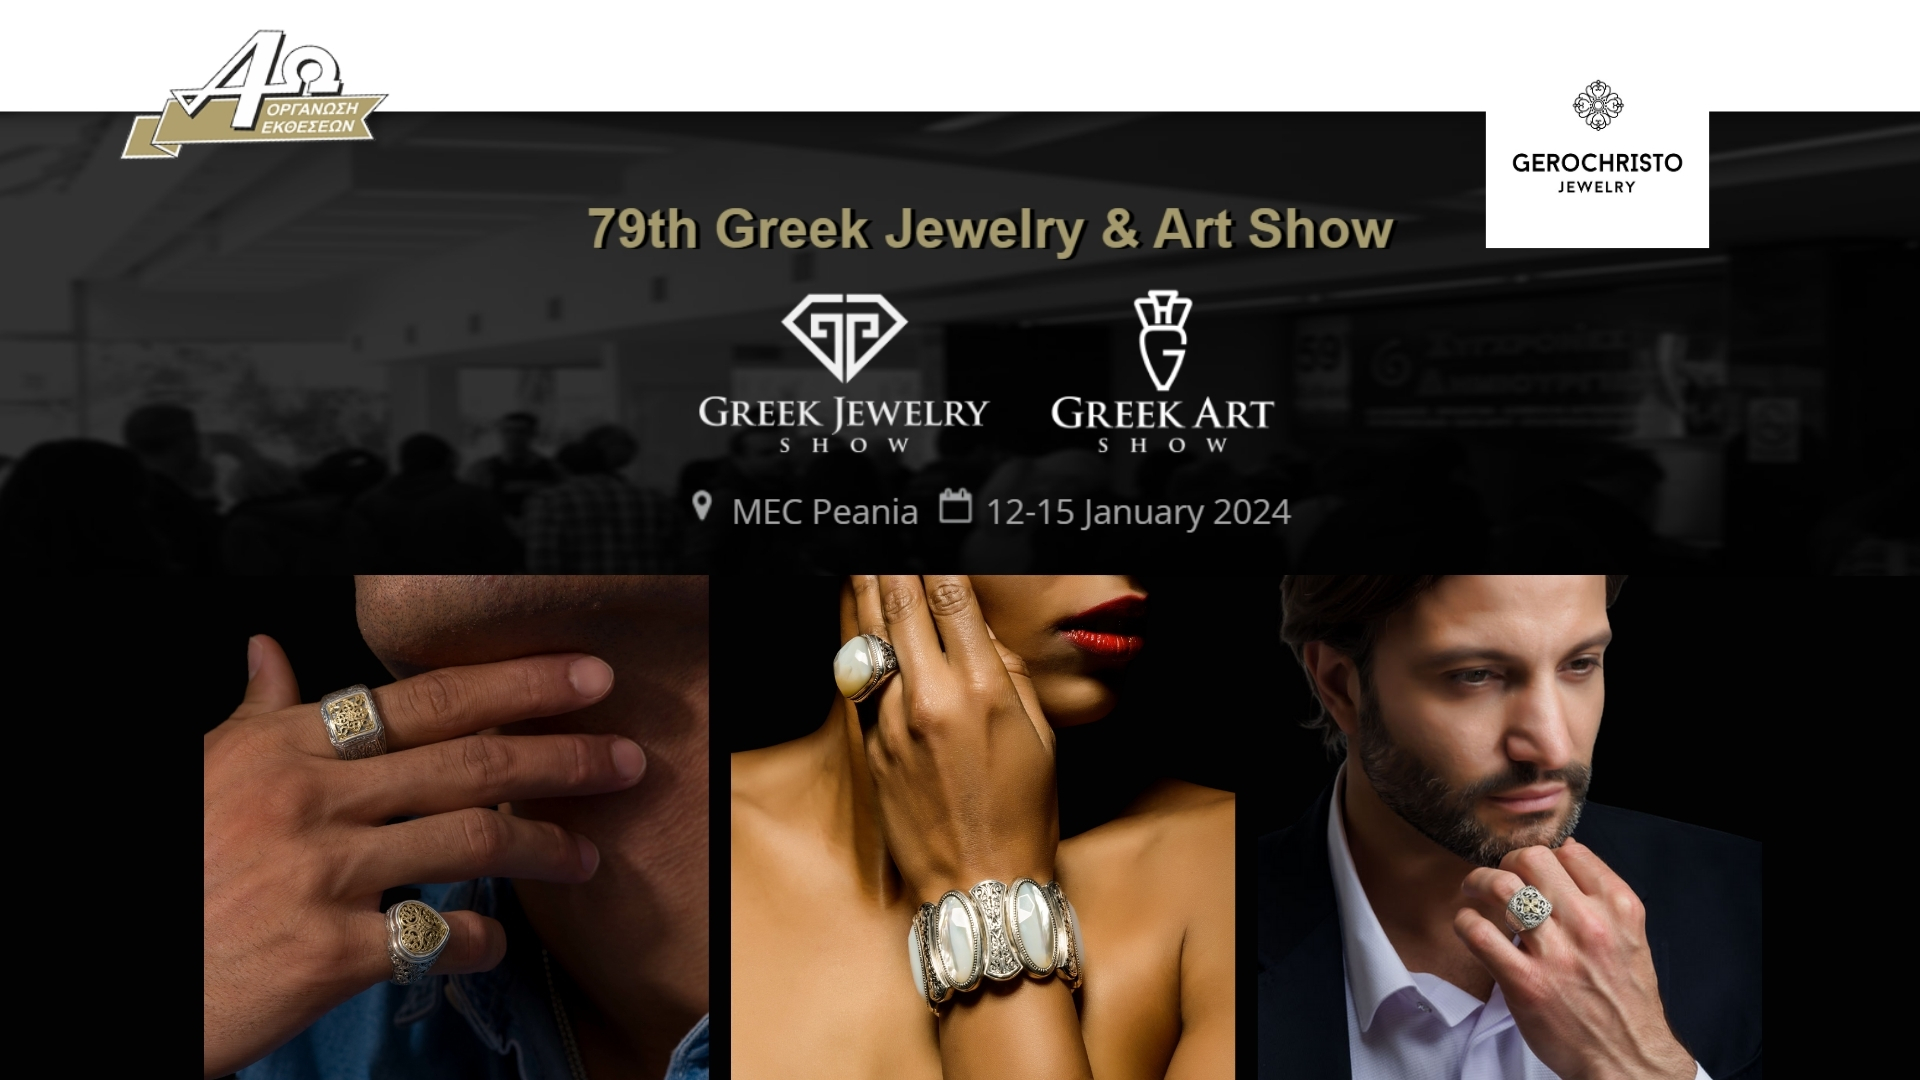 Gerochristo Jewelry Announces Participation in the 79th Greek Jewelry & Art Show